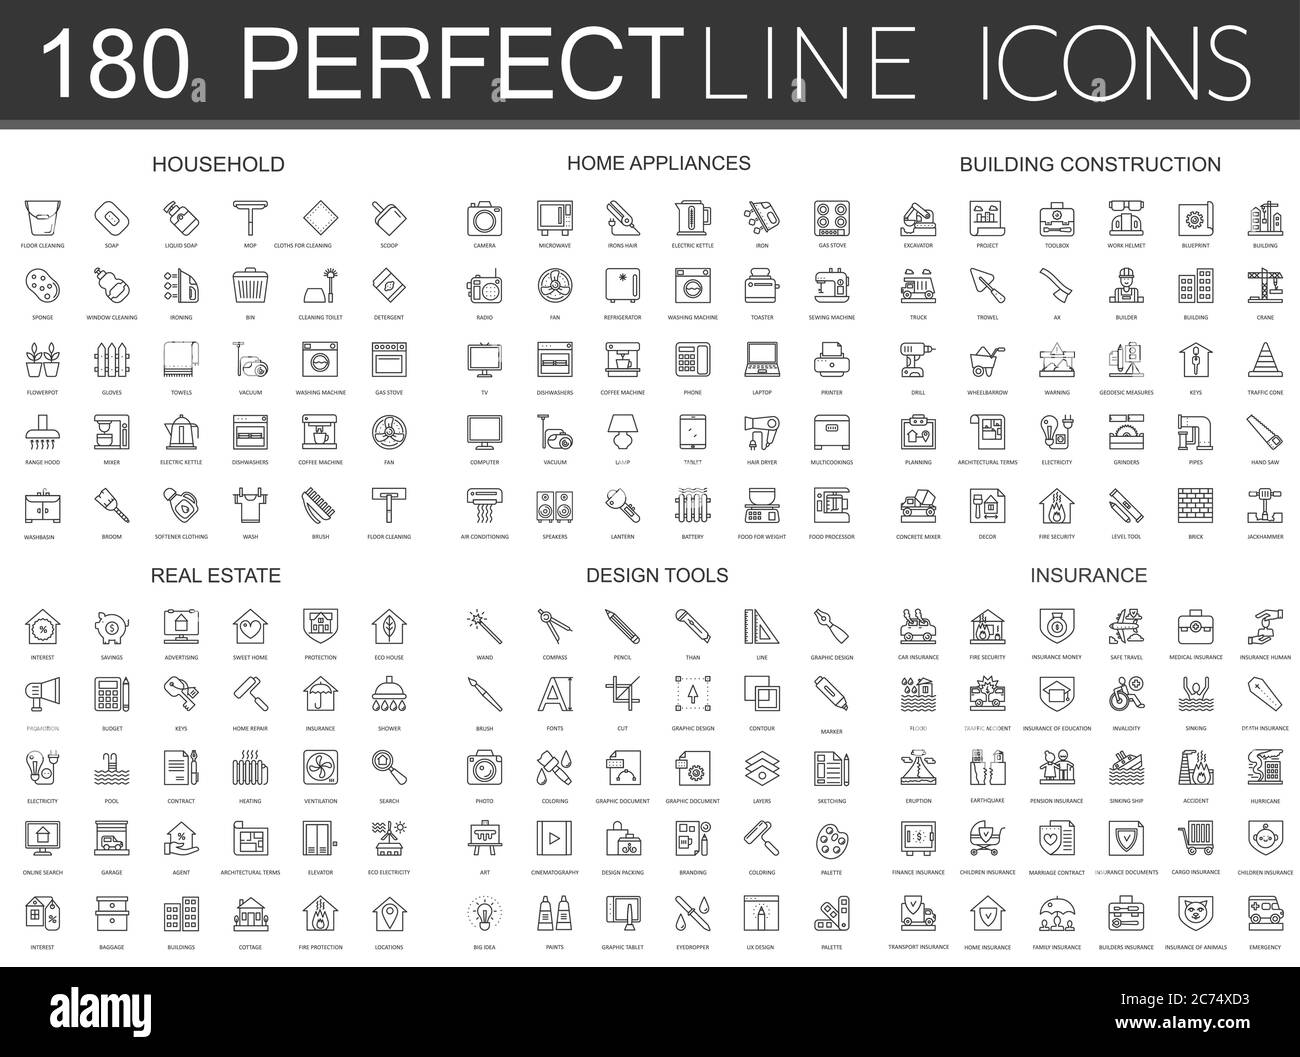 180 modern thin line icons set of household, home appliances, building construction, real estate, design tools, insurance isolated. Stock Vector